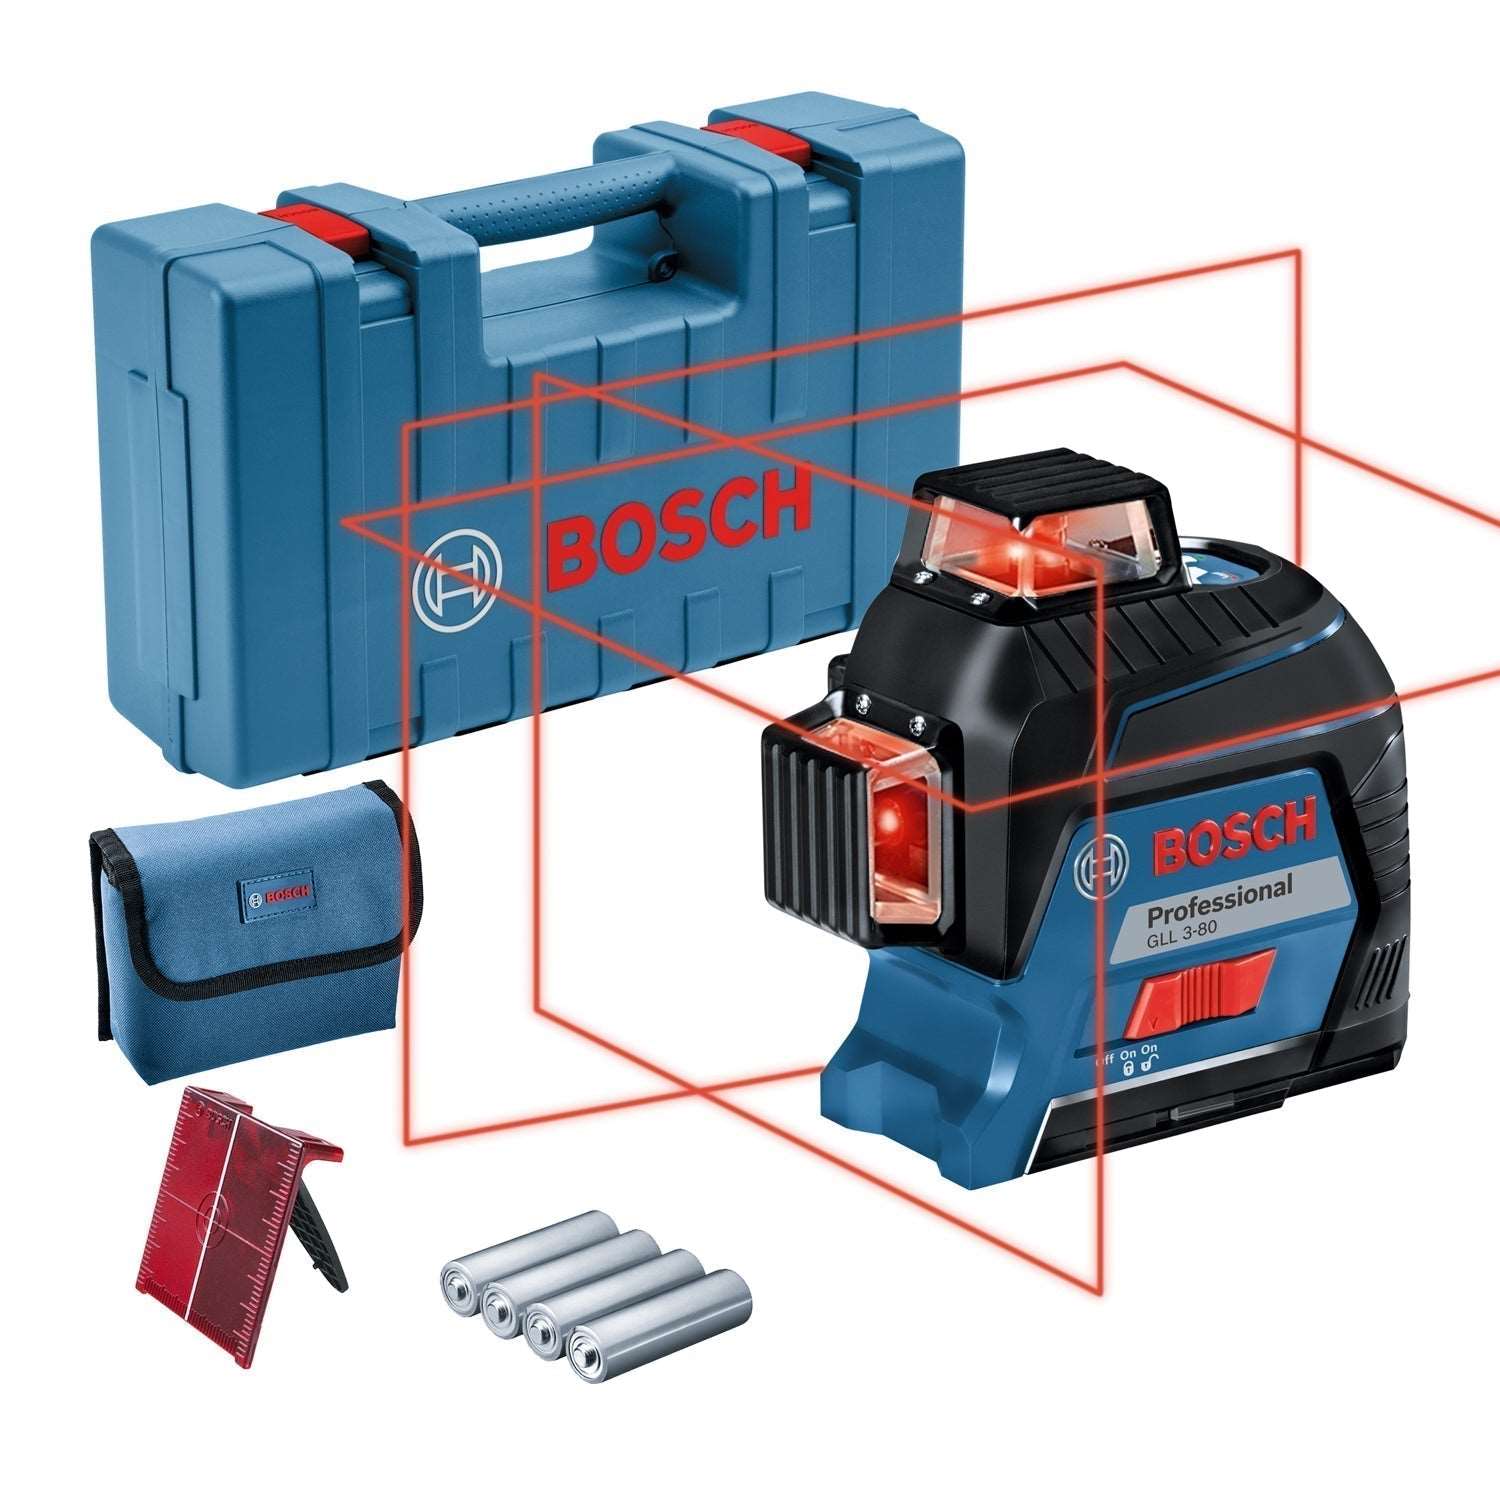 Bosch Professional 360° Line Laser Level GLL 3-80 0601063S00 Power Tool Services